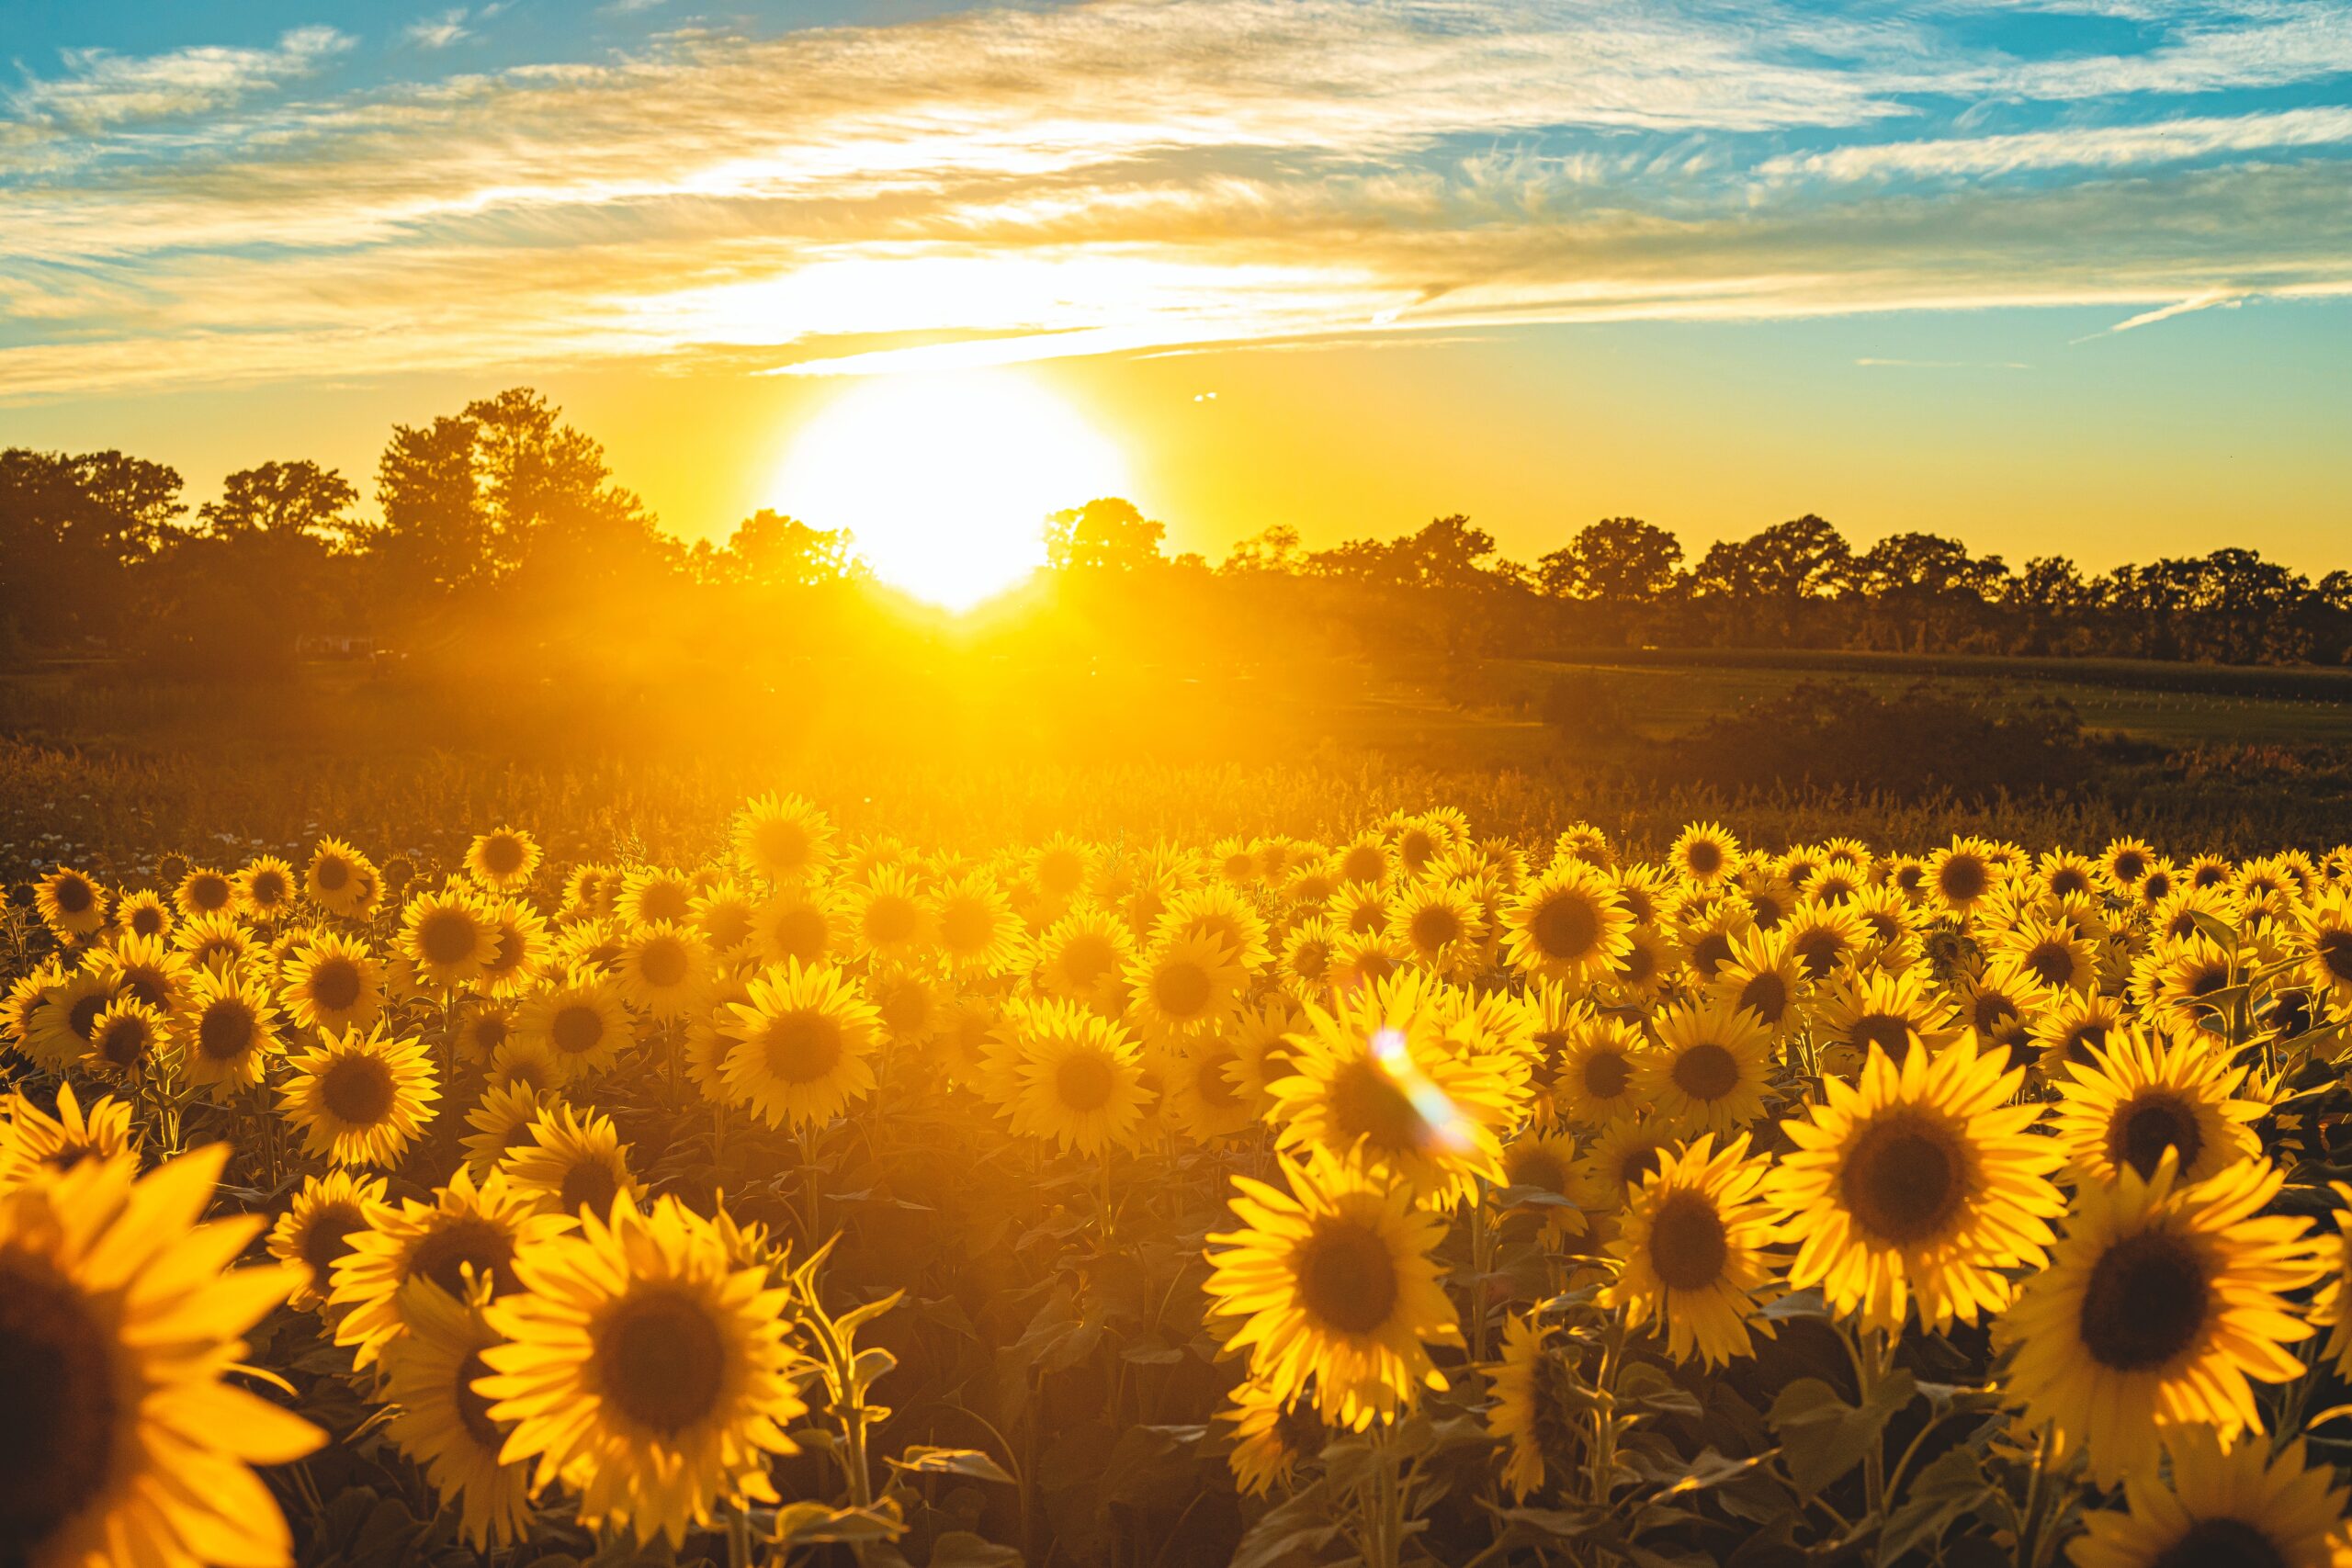 How To Grow Sunflowers in 3 Easy Steps